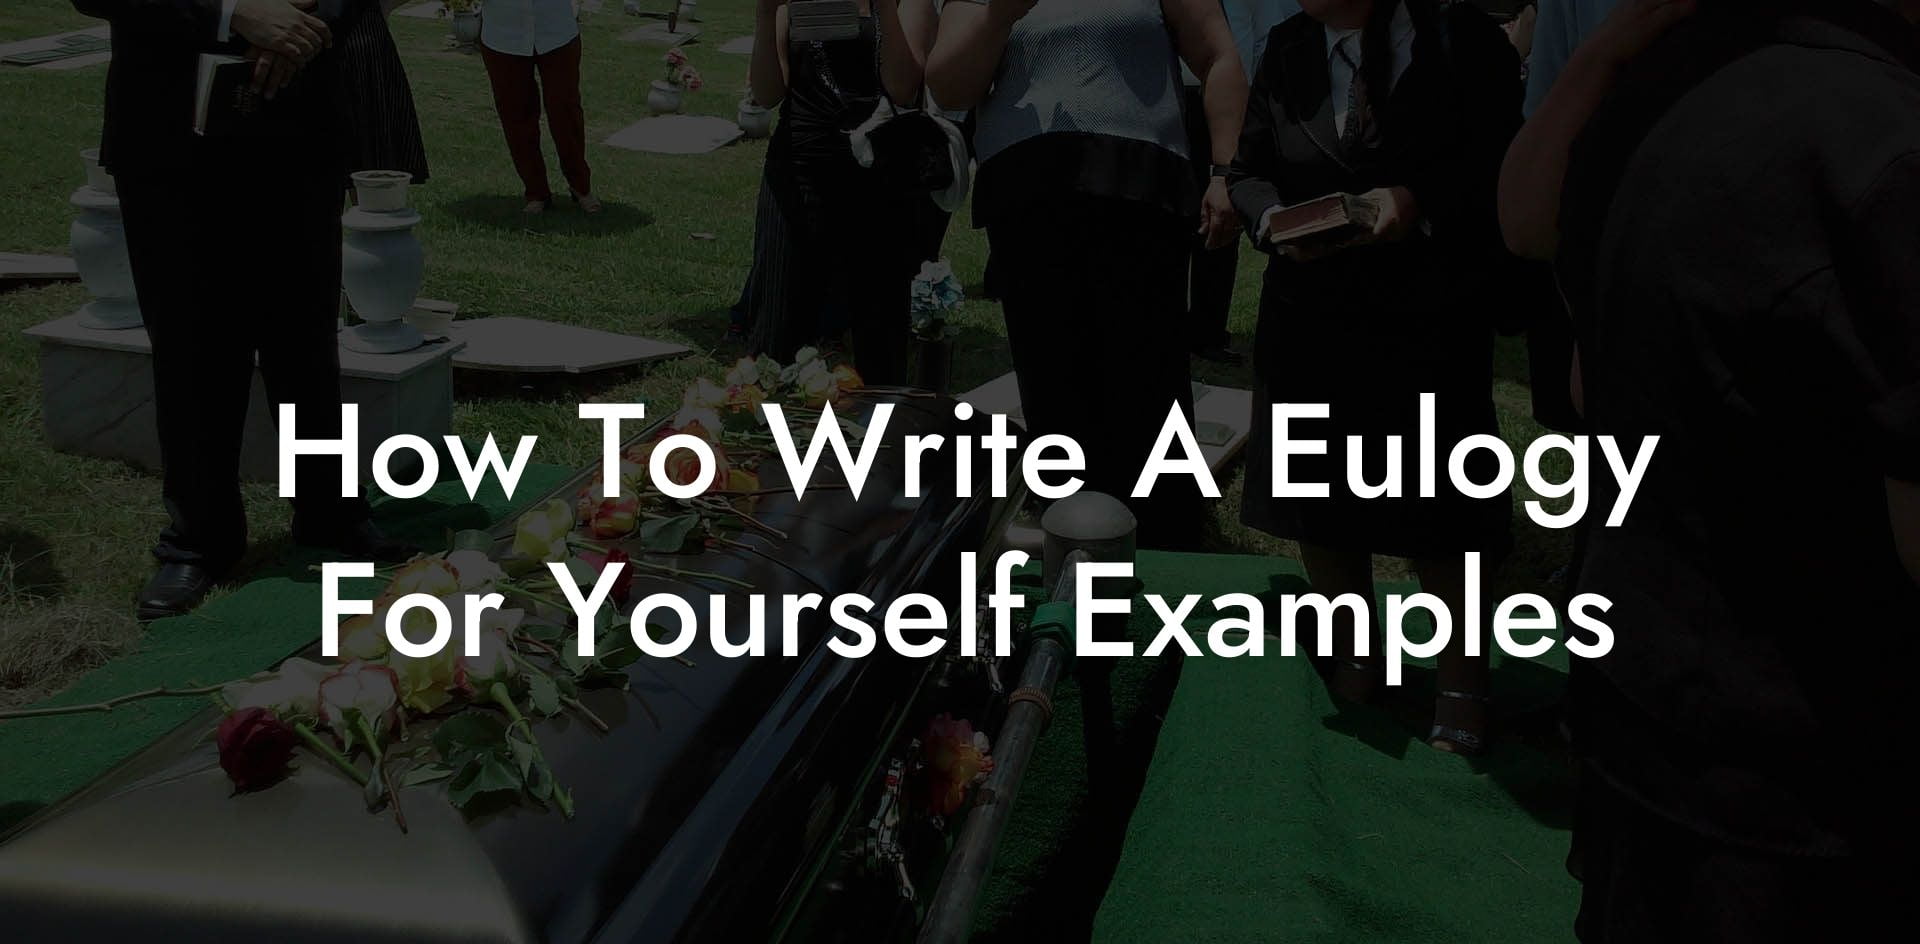 How To Write A Eulogy For Yourself Examples